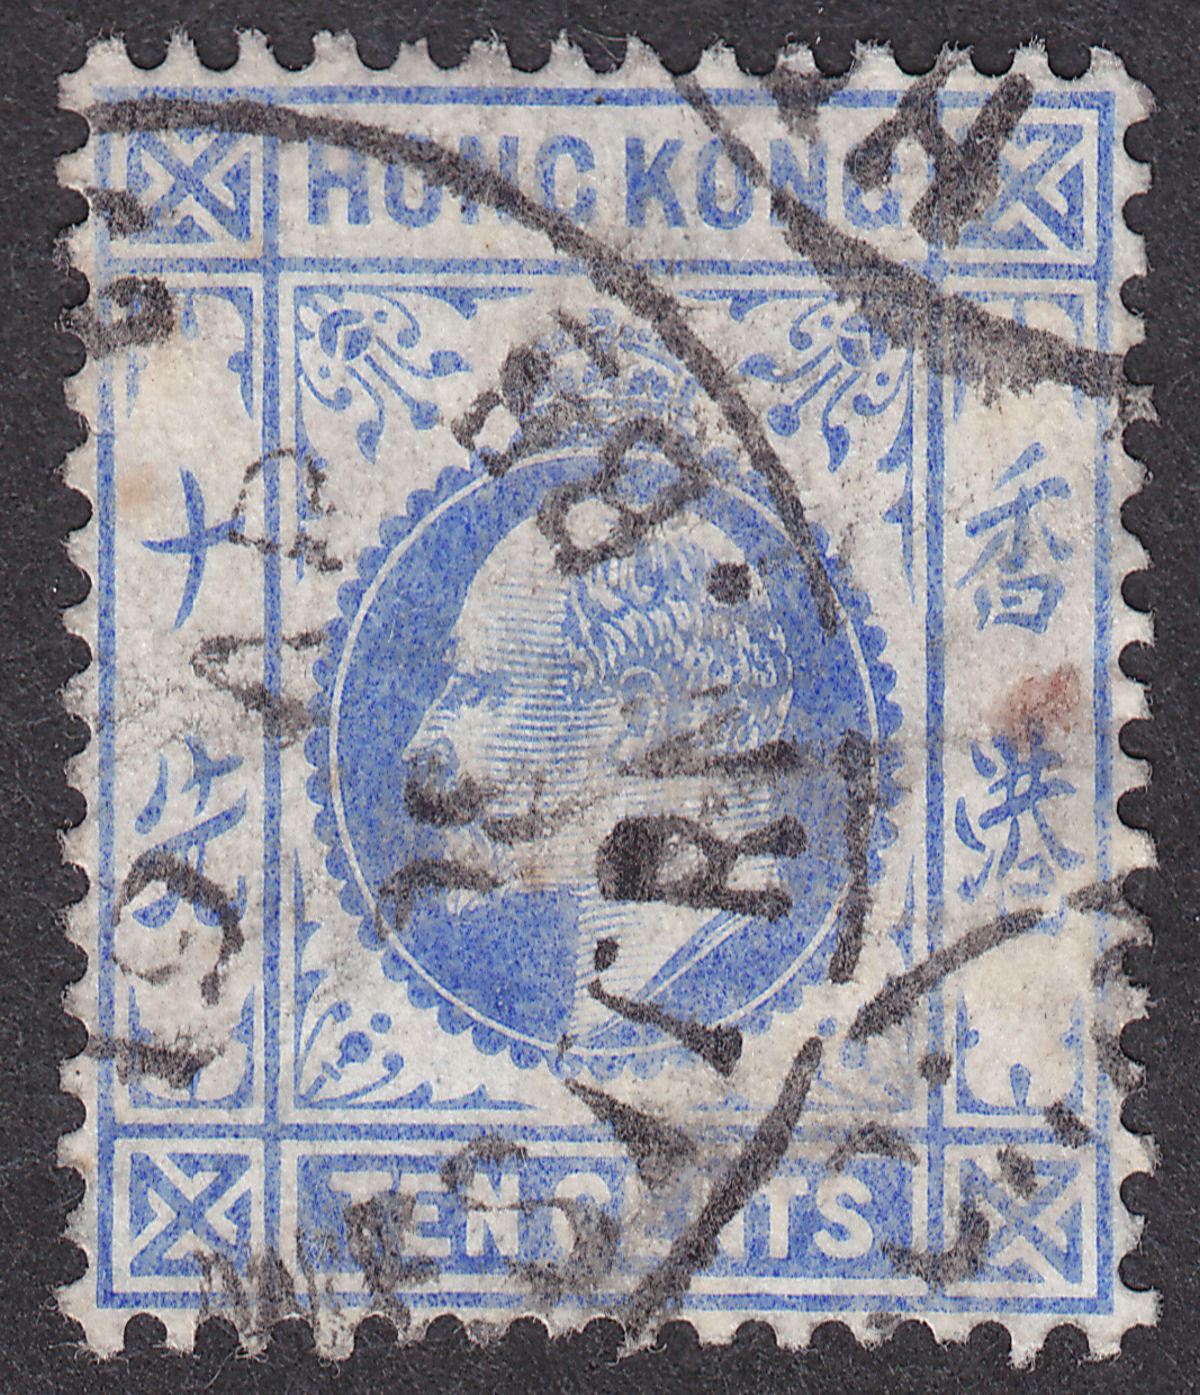 Hong Kong 1908 KEVII 10c Used SG95 with WESTERN BR Postmark